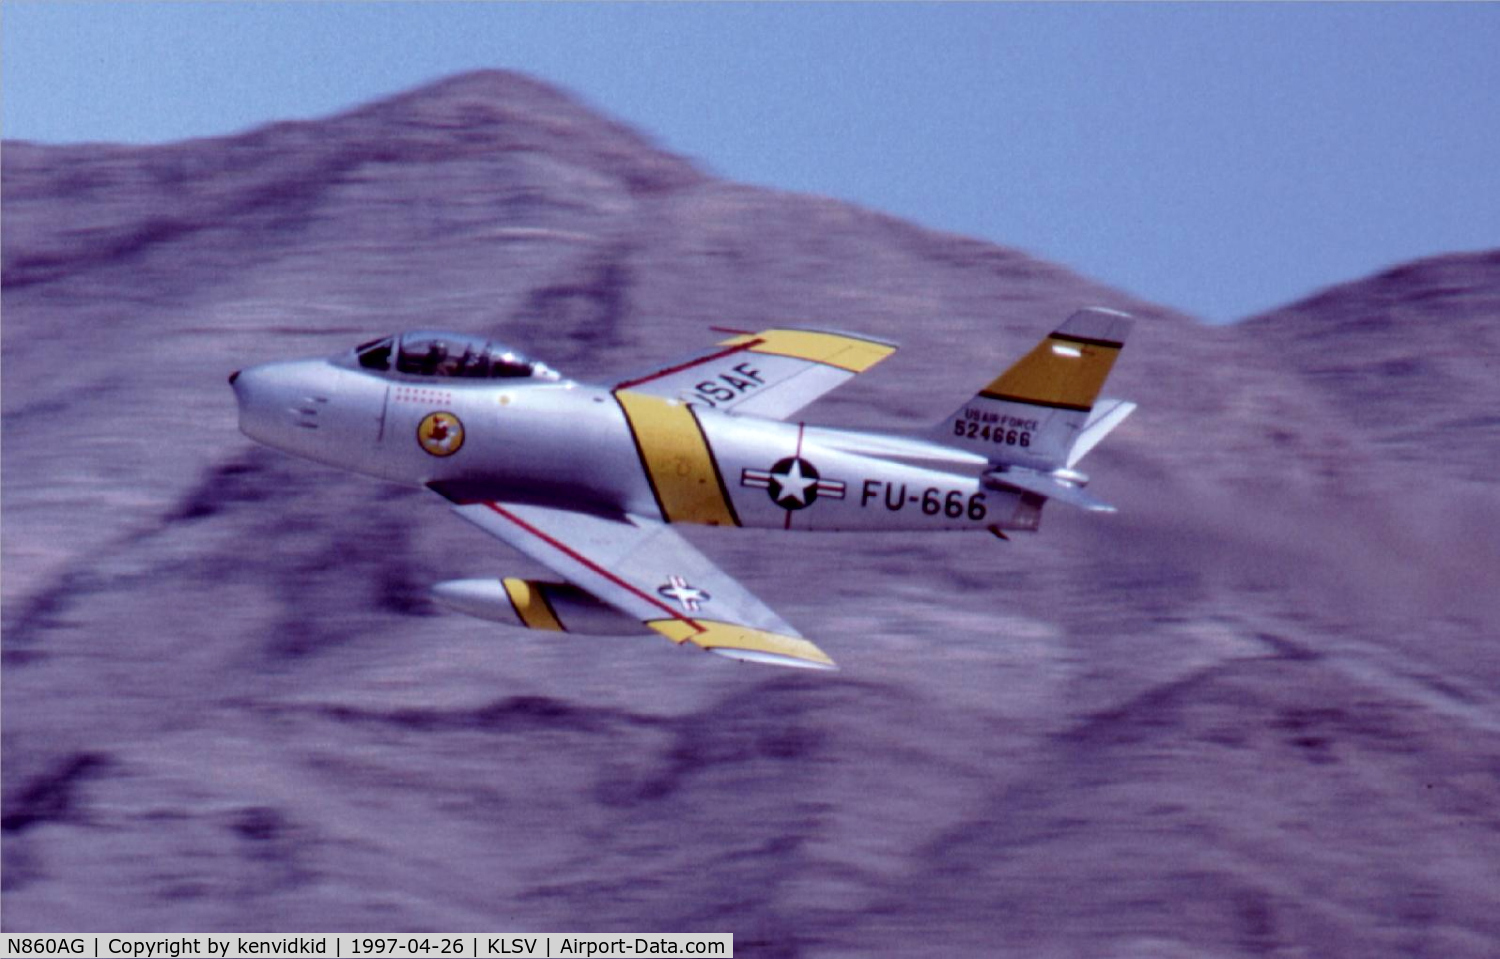 N860AG, 1952 North American F-86F Sabre C/N 191-362 (52-4666), At the 1997 50th Anniversary of the USAF air display, Nellis AFB.